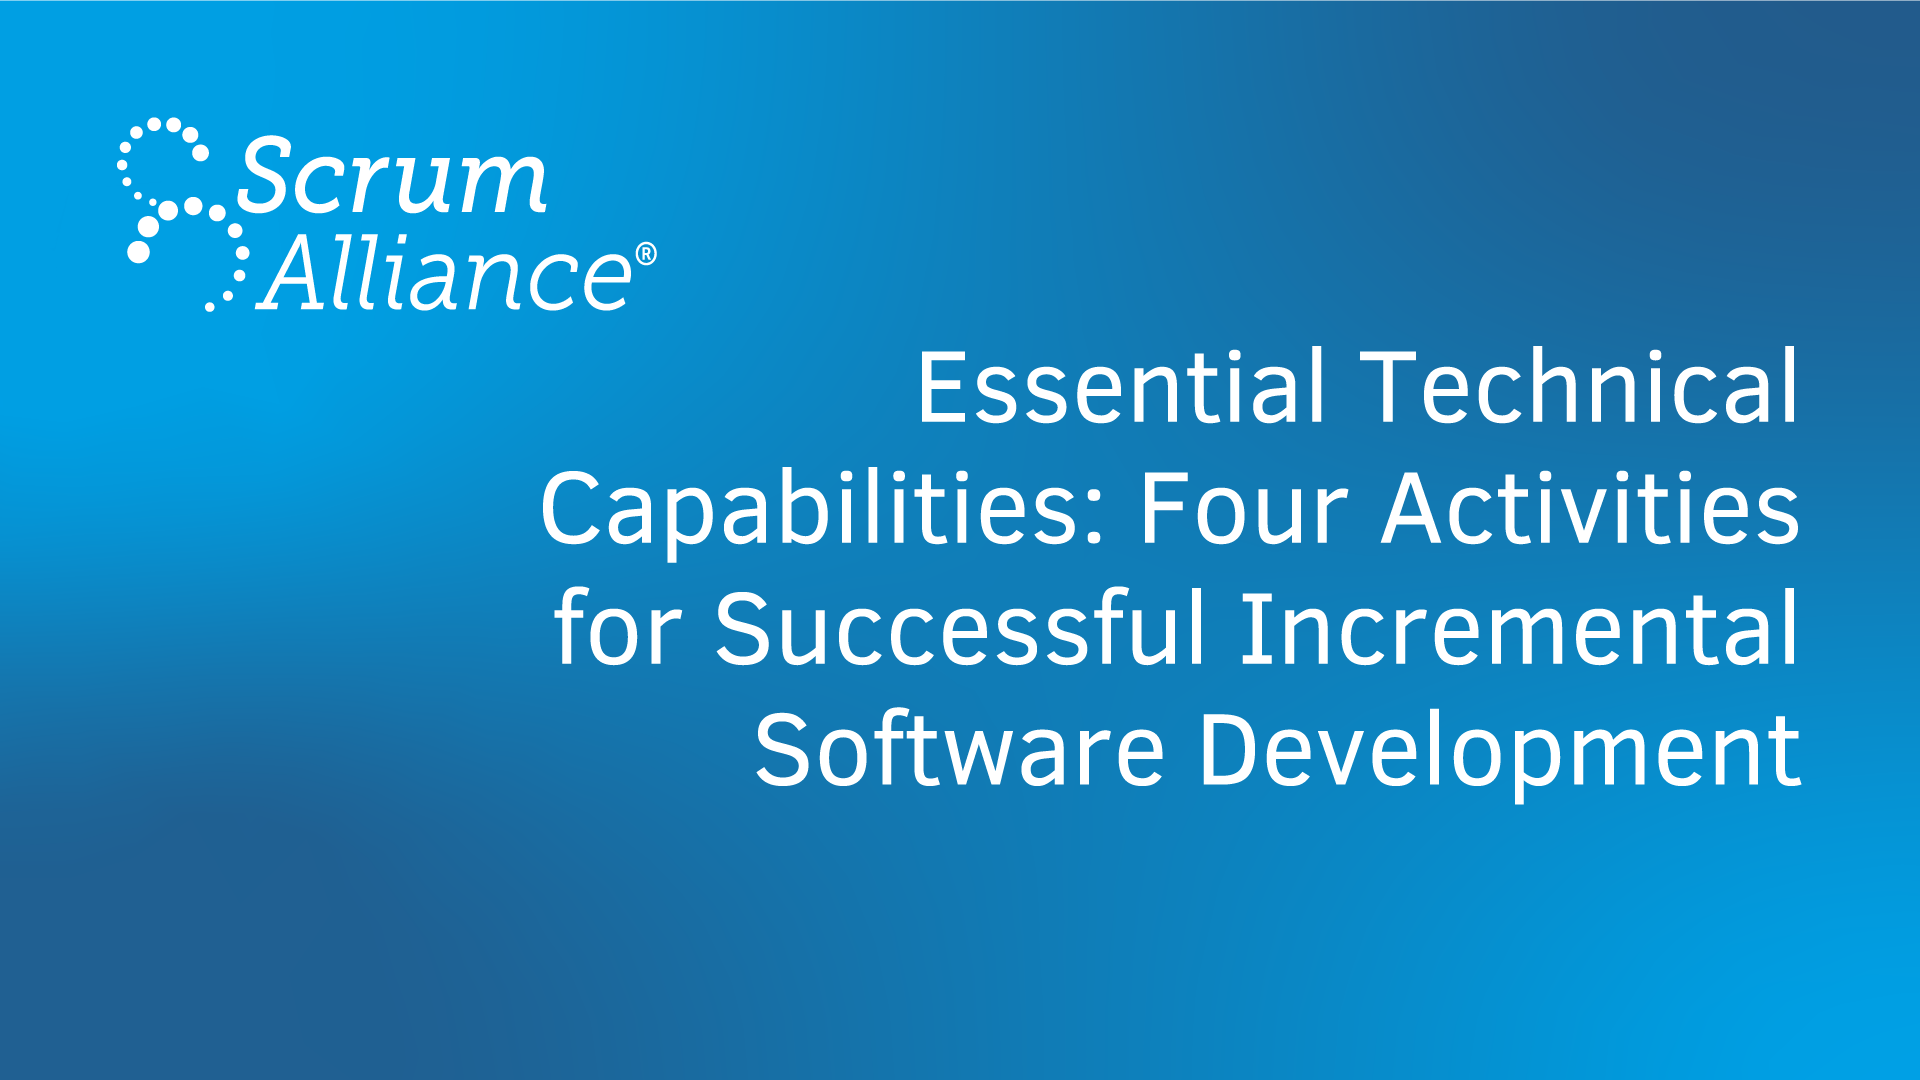 Essential Technical Capabilities: Four Activities for Successful Incremental Software Development